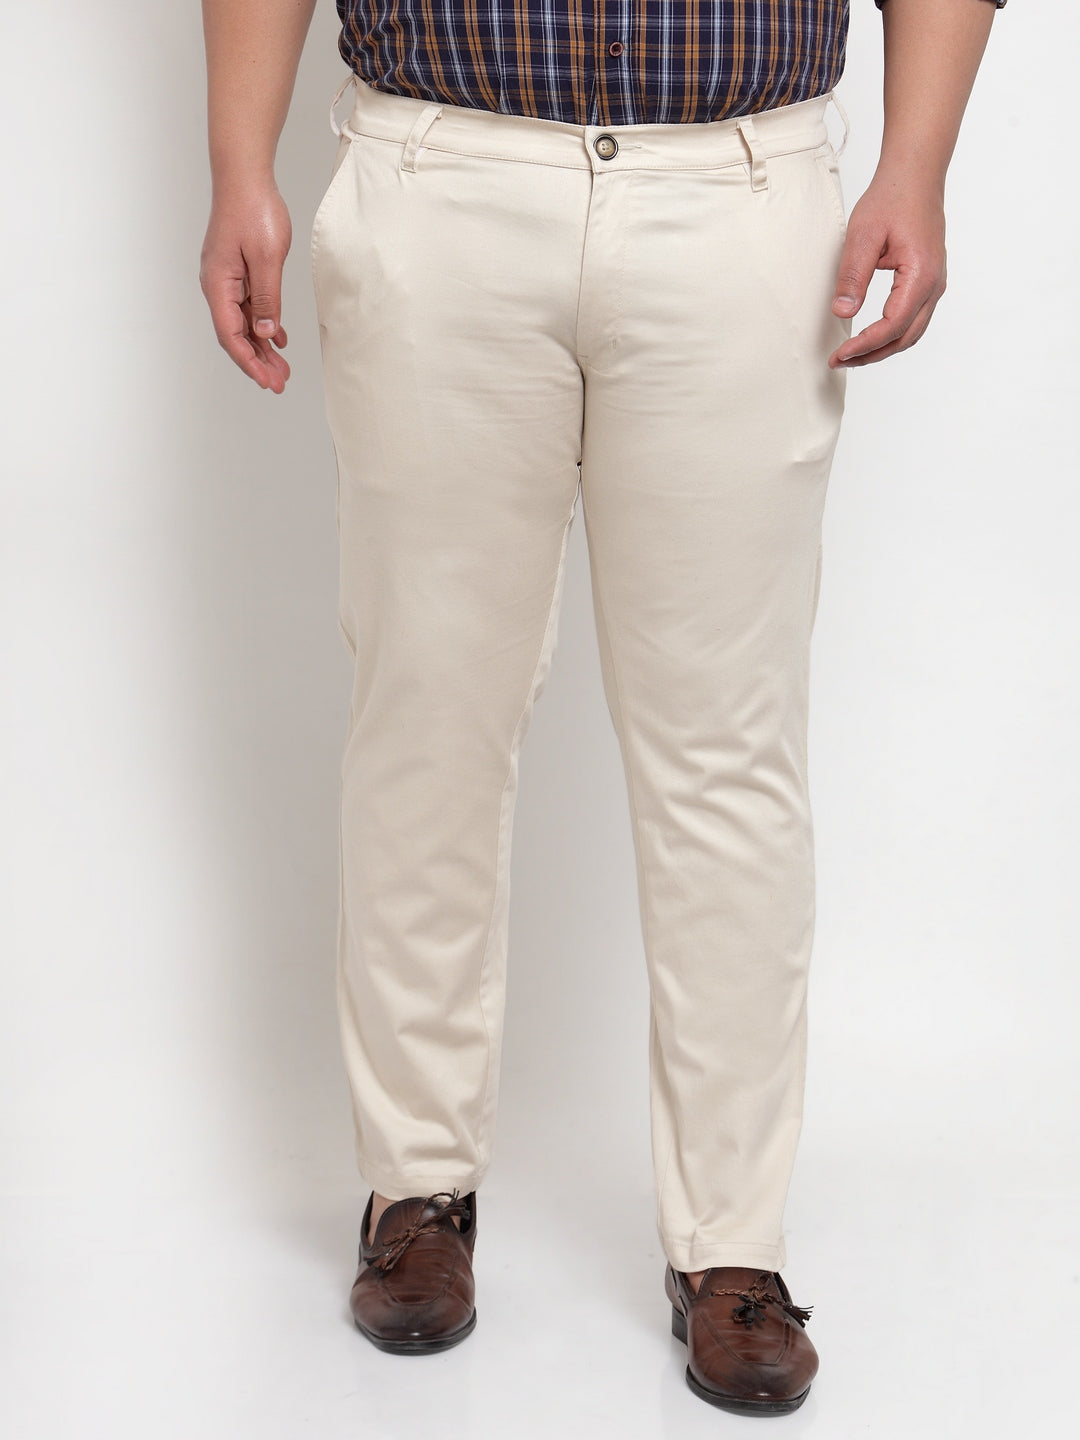 Buy AD by Arvind Men Light Khaki Regular Fit Mid Rise Casual Chinos -  NNNOW.com